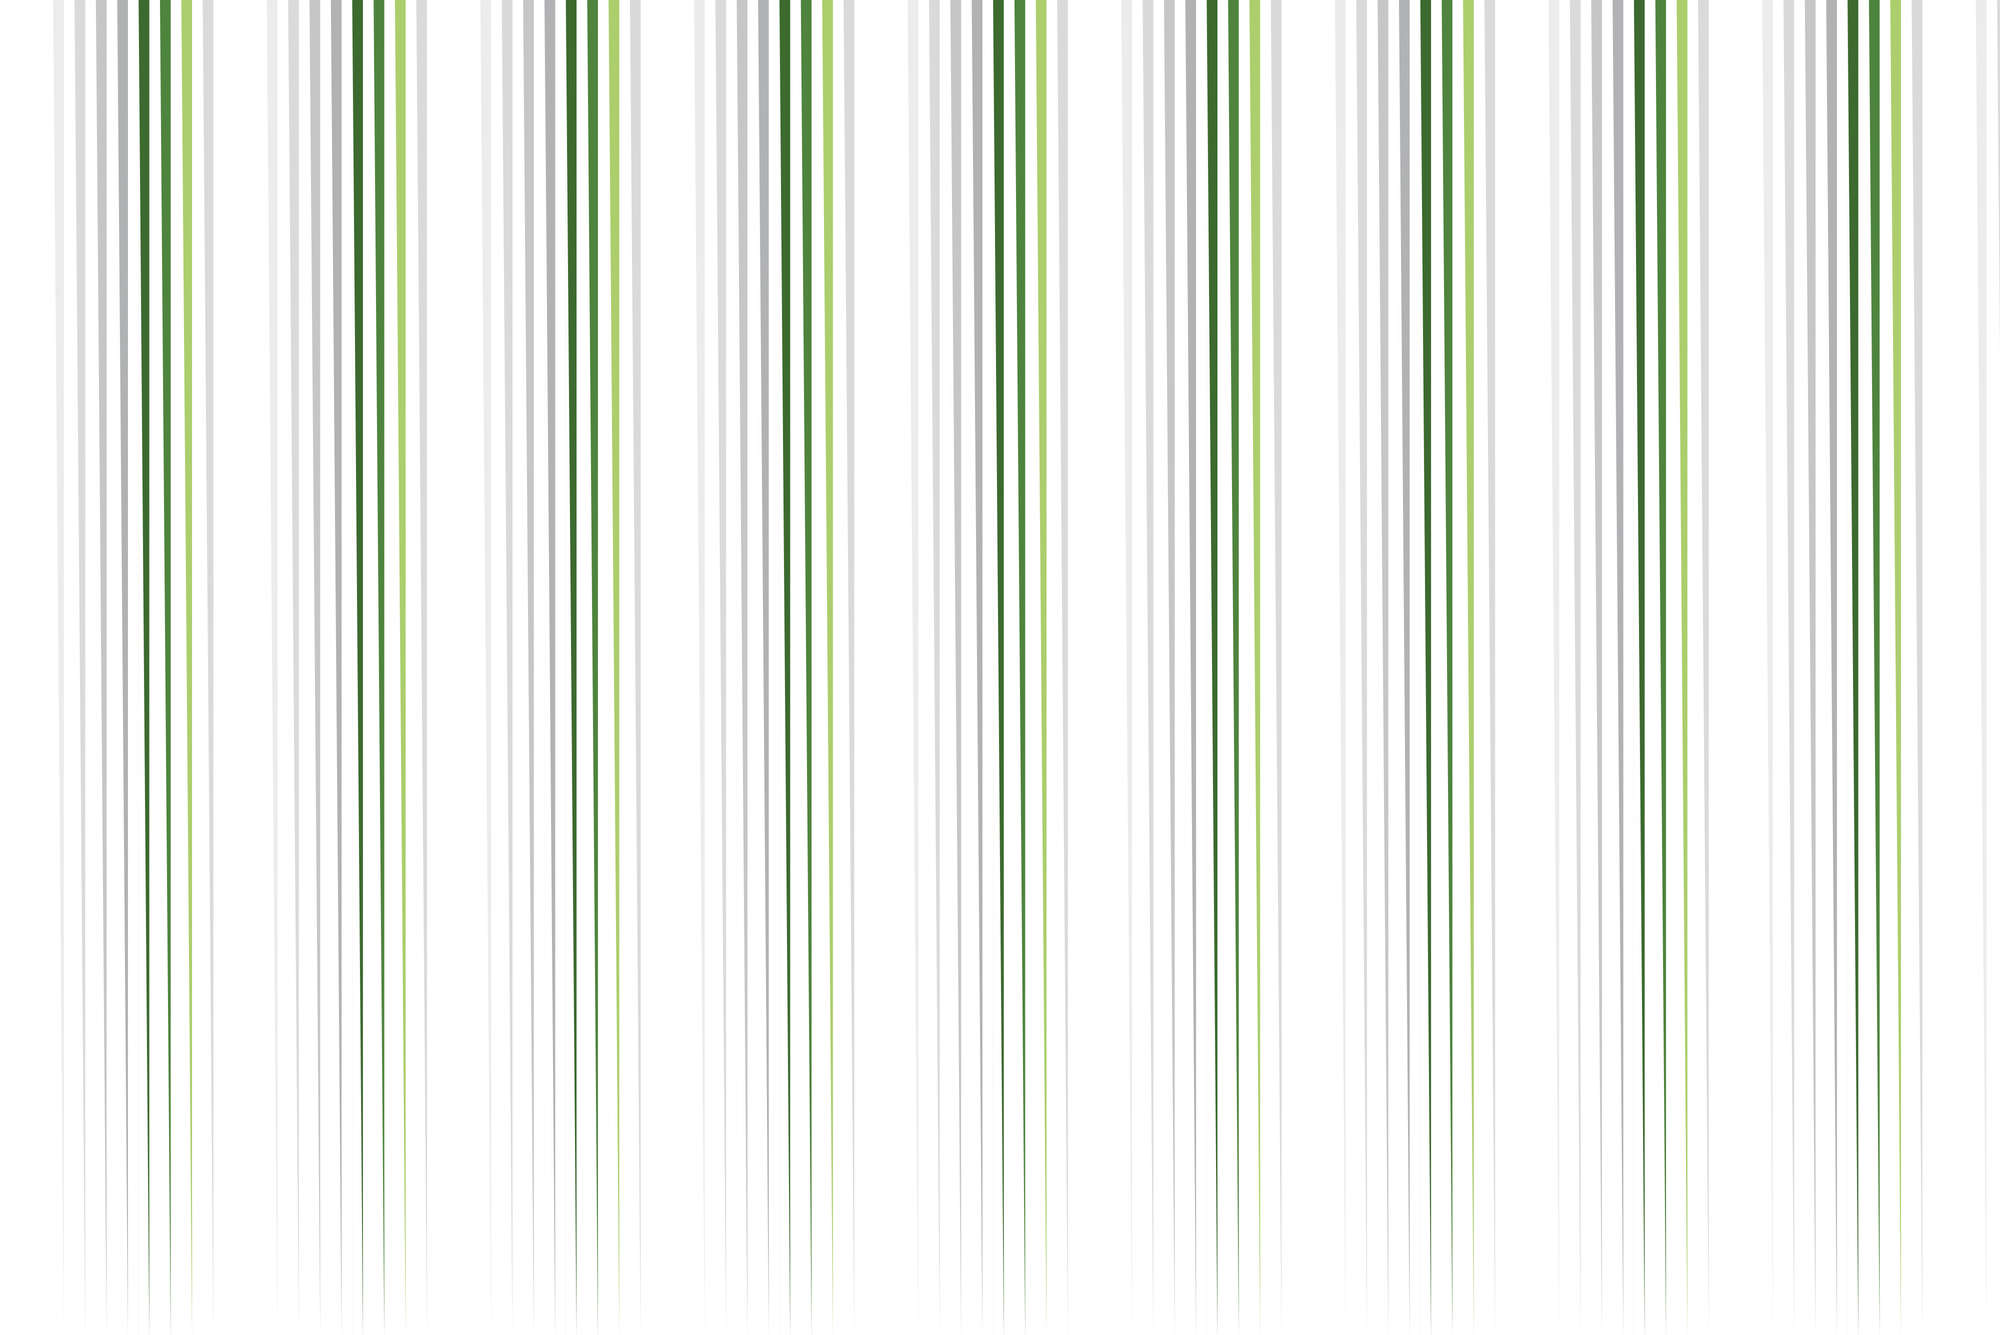             Design wall mural thinning stripes white green on textured non-woven
        